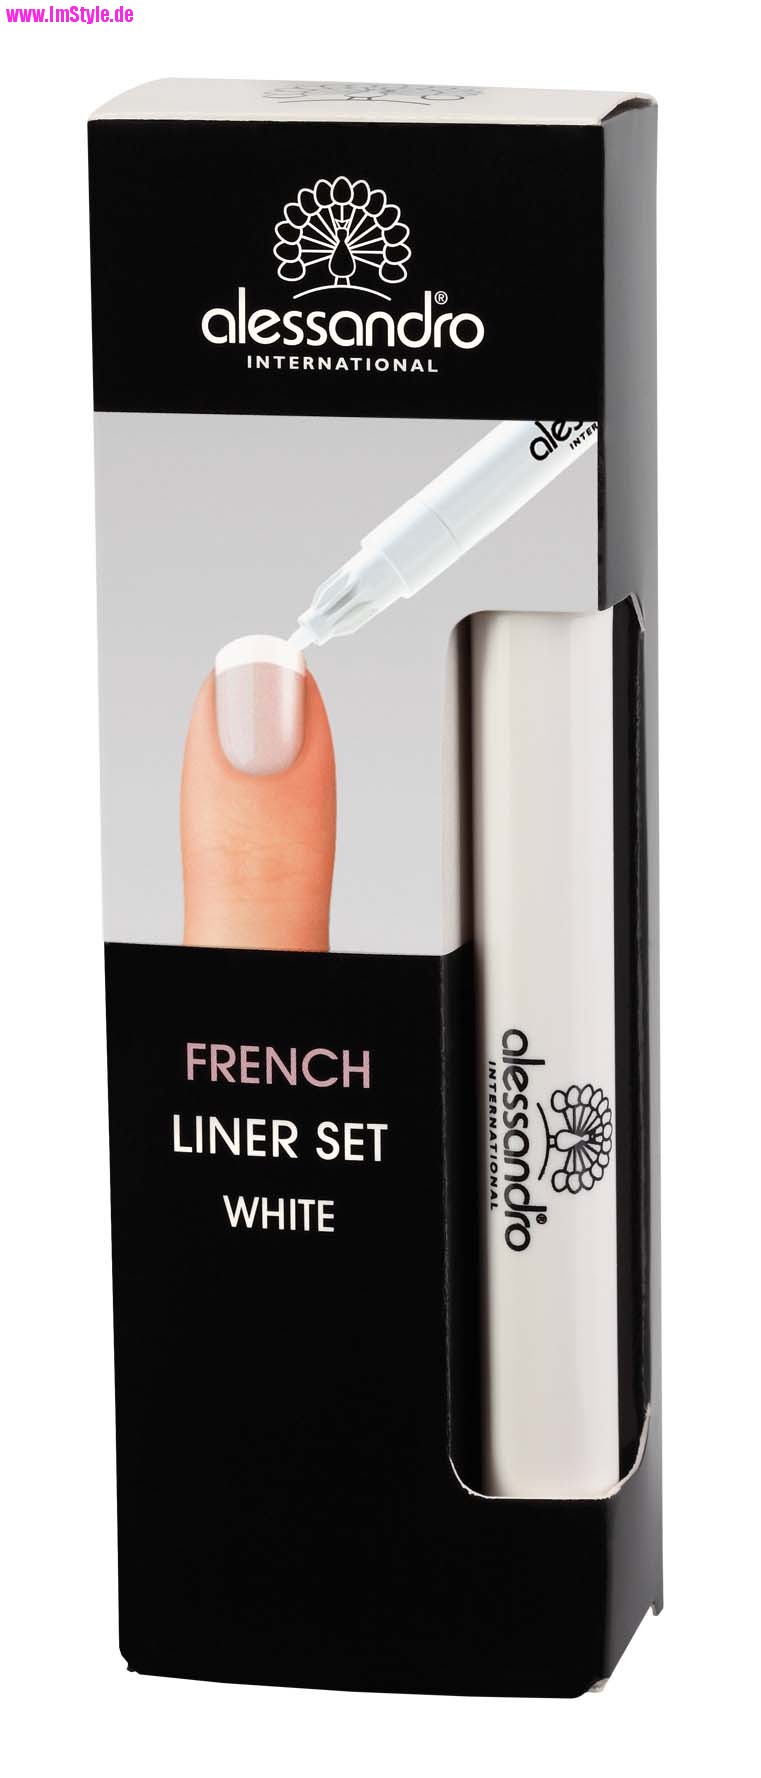 alessandro french-nails liner set classic